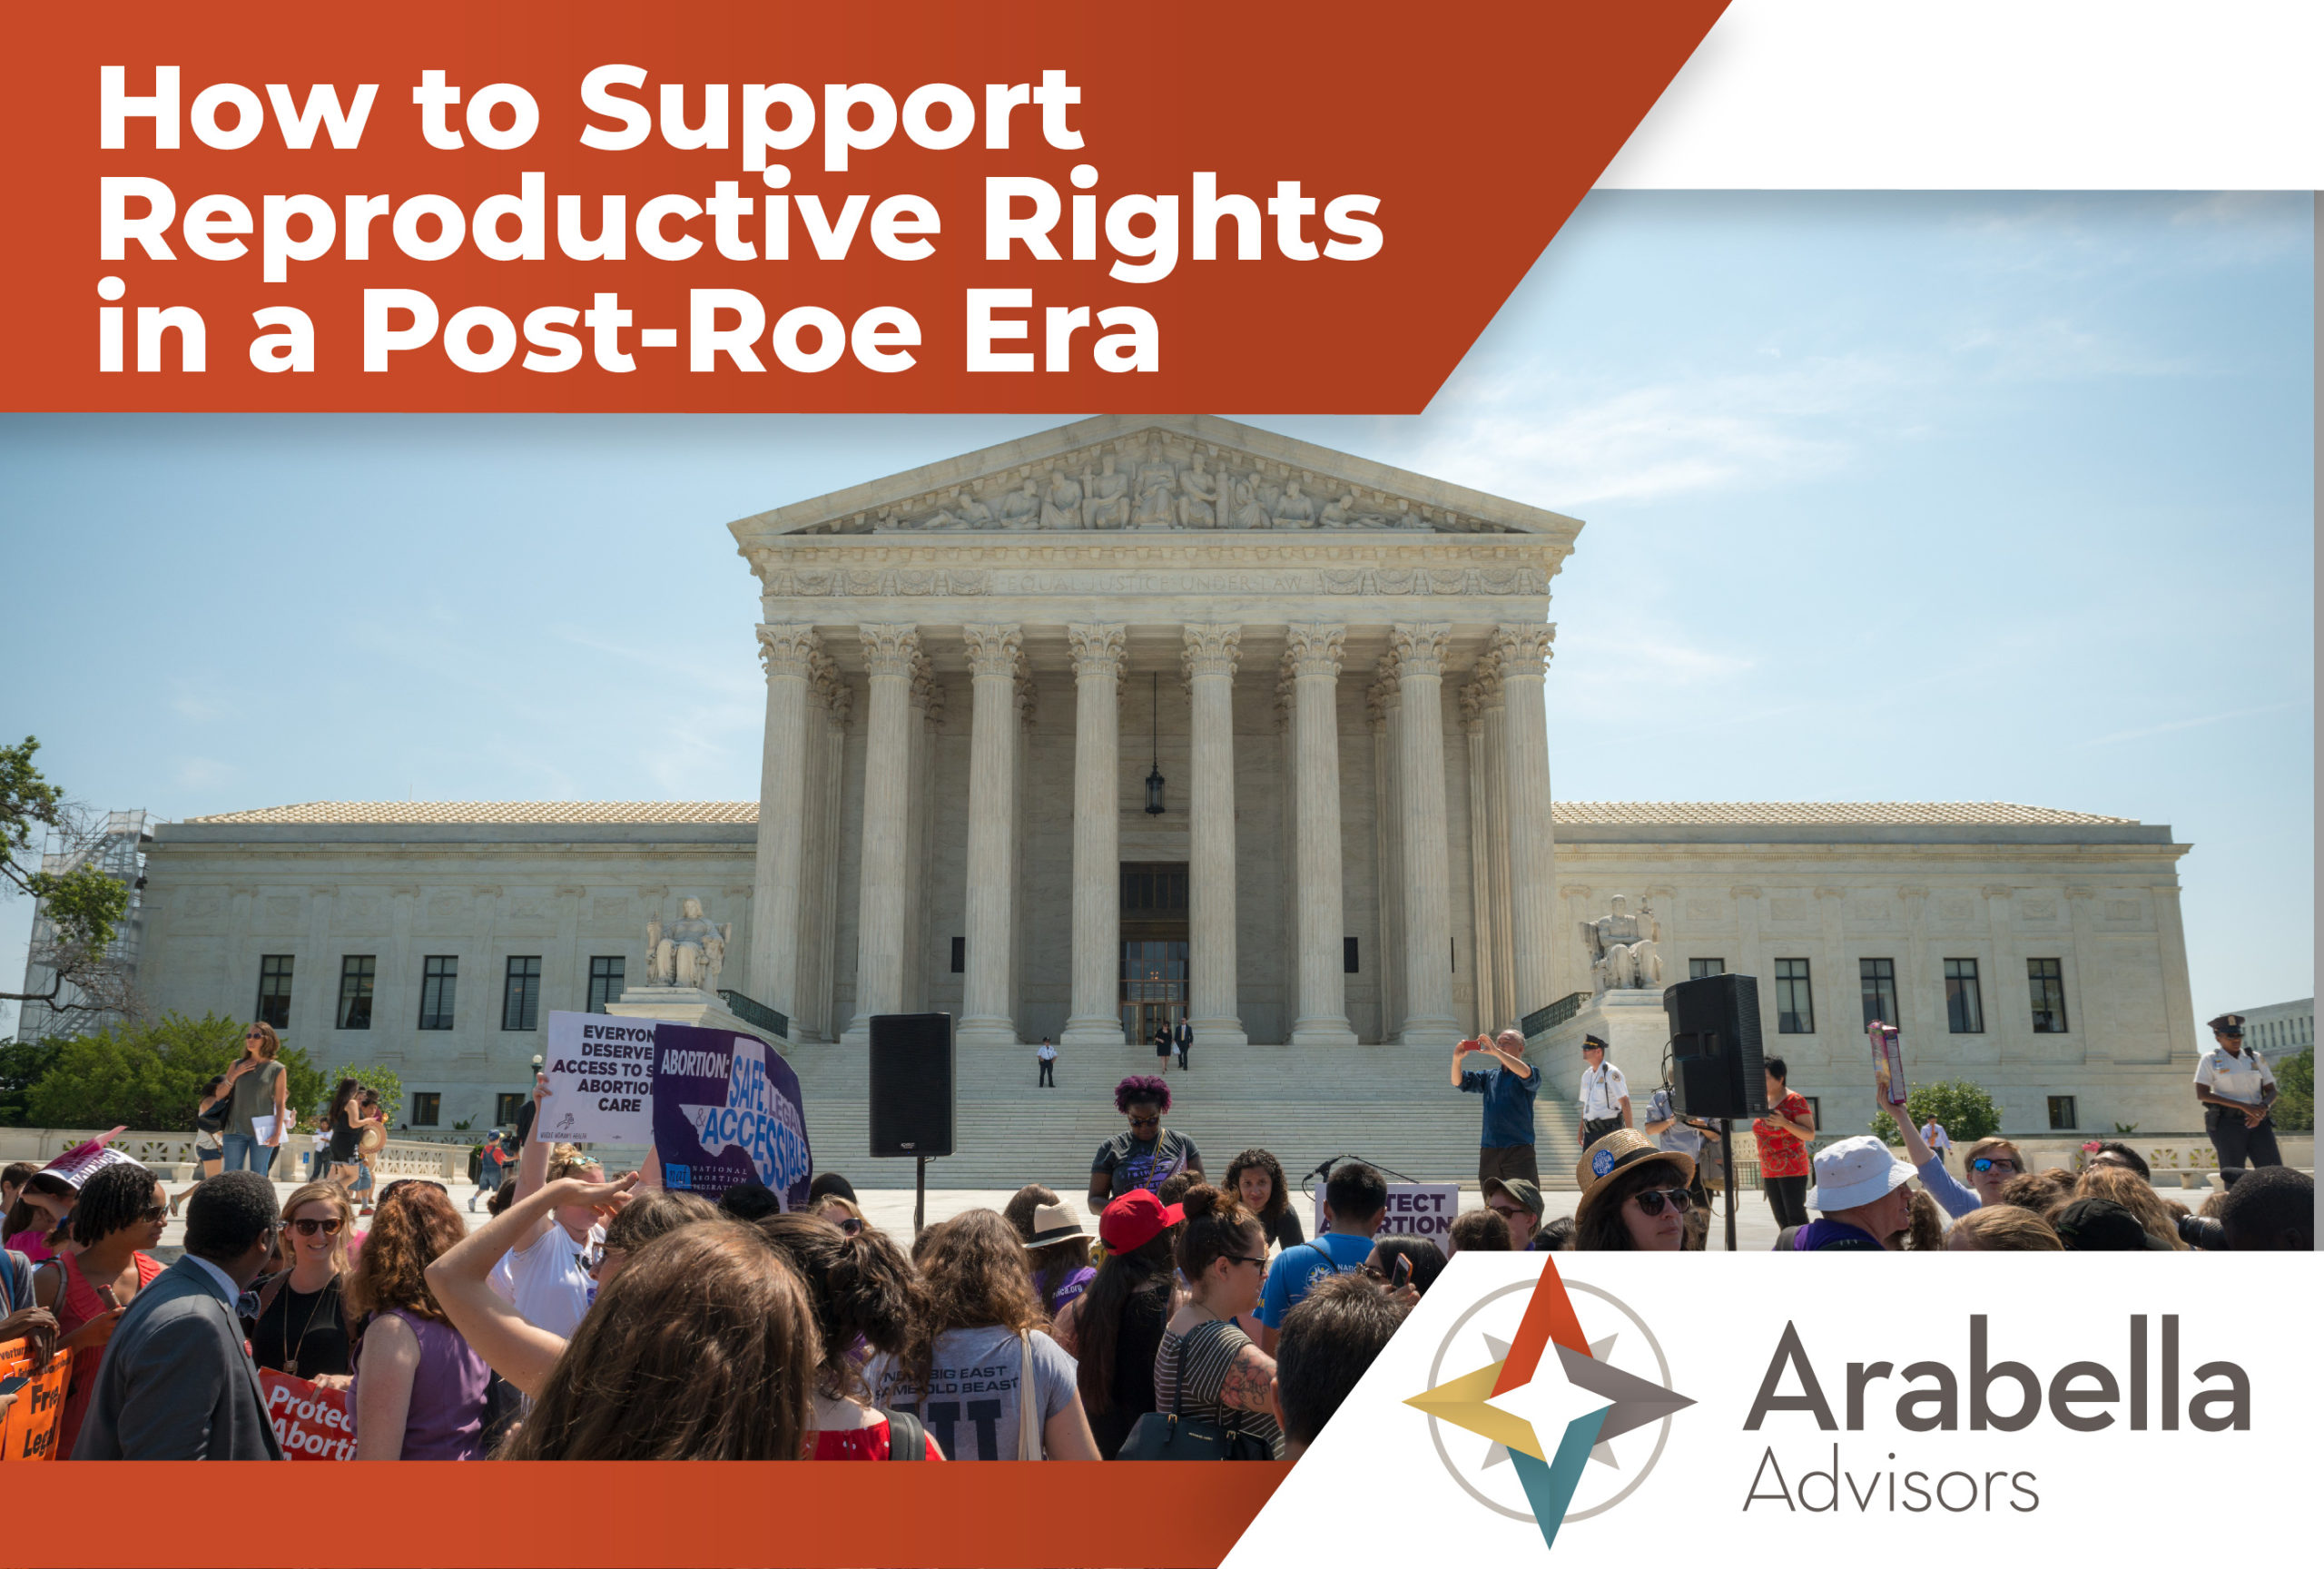 How to Support Reproductive Rights in a Post-Roe Era